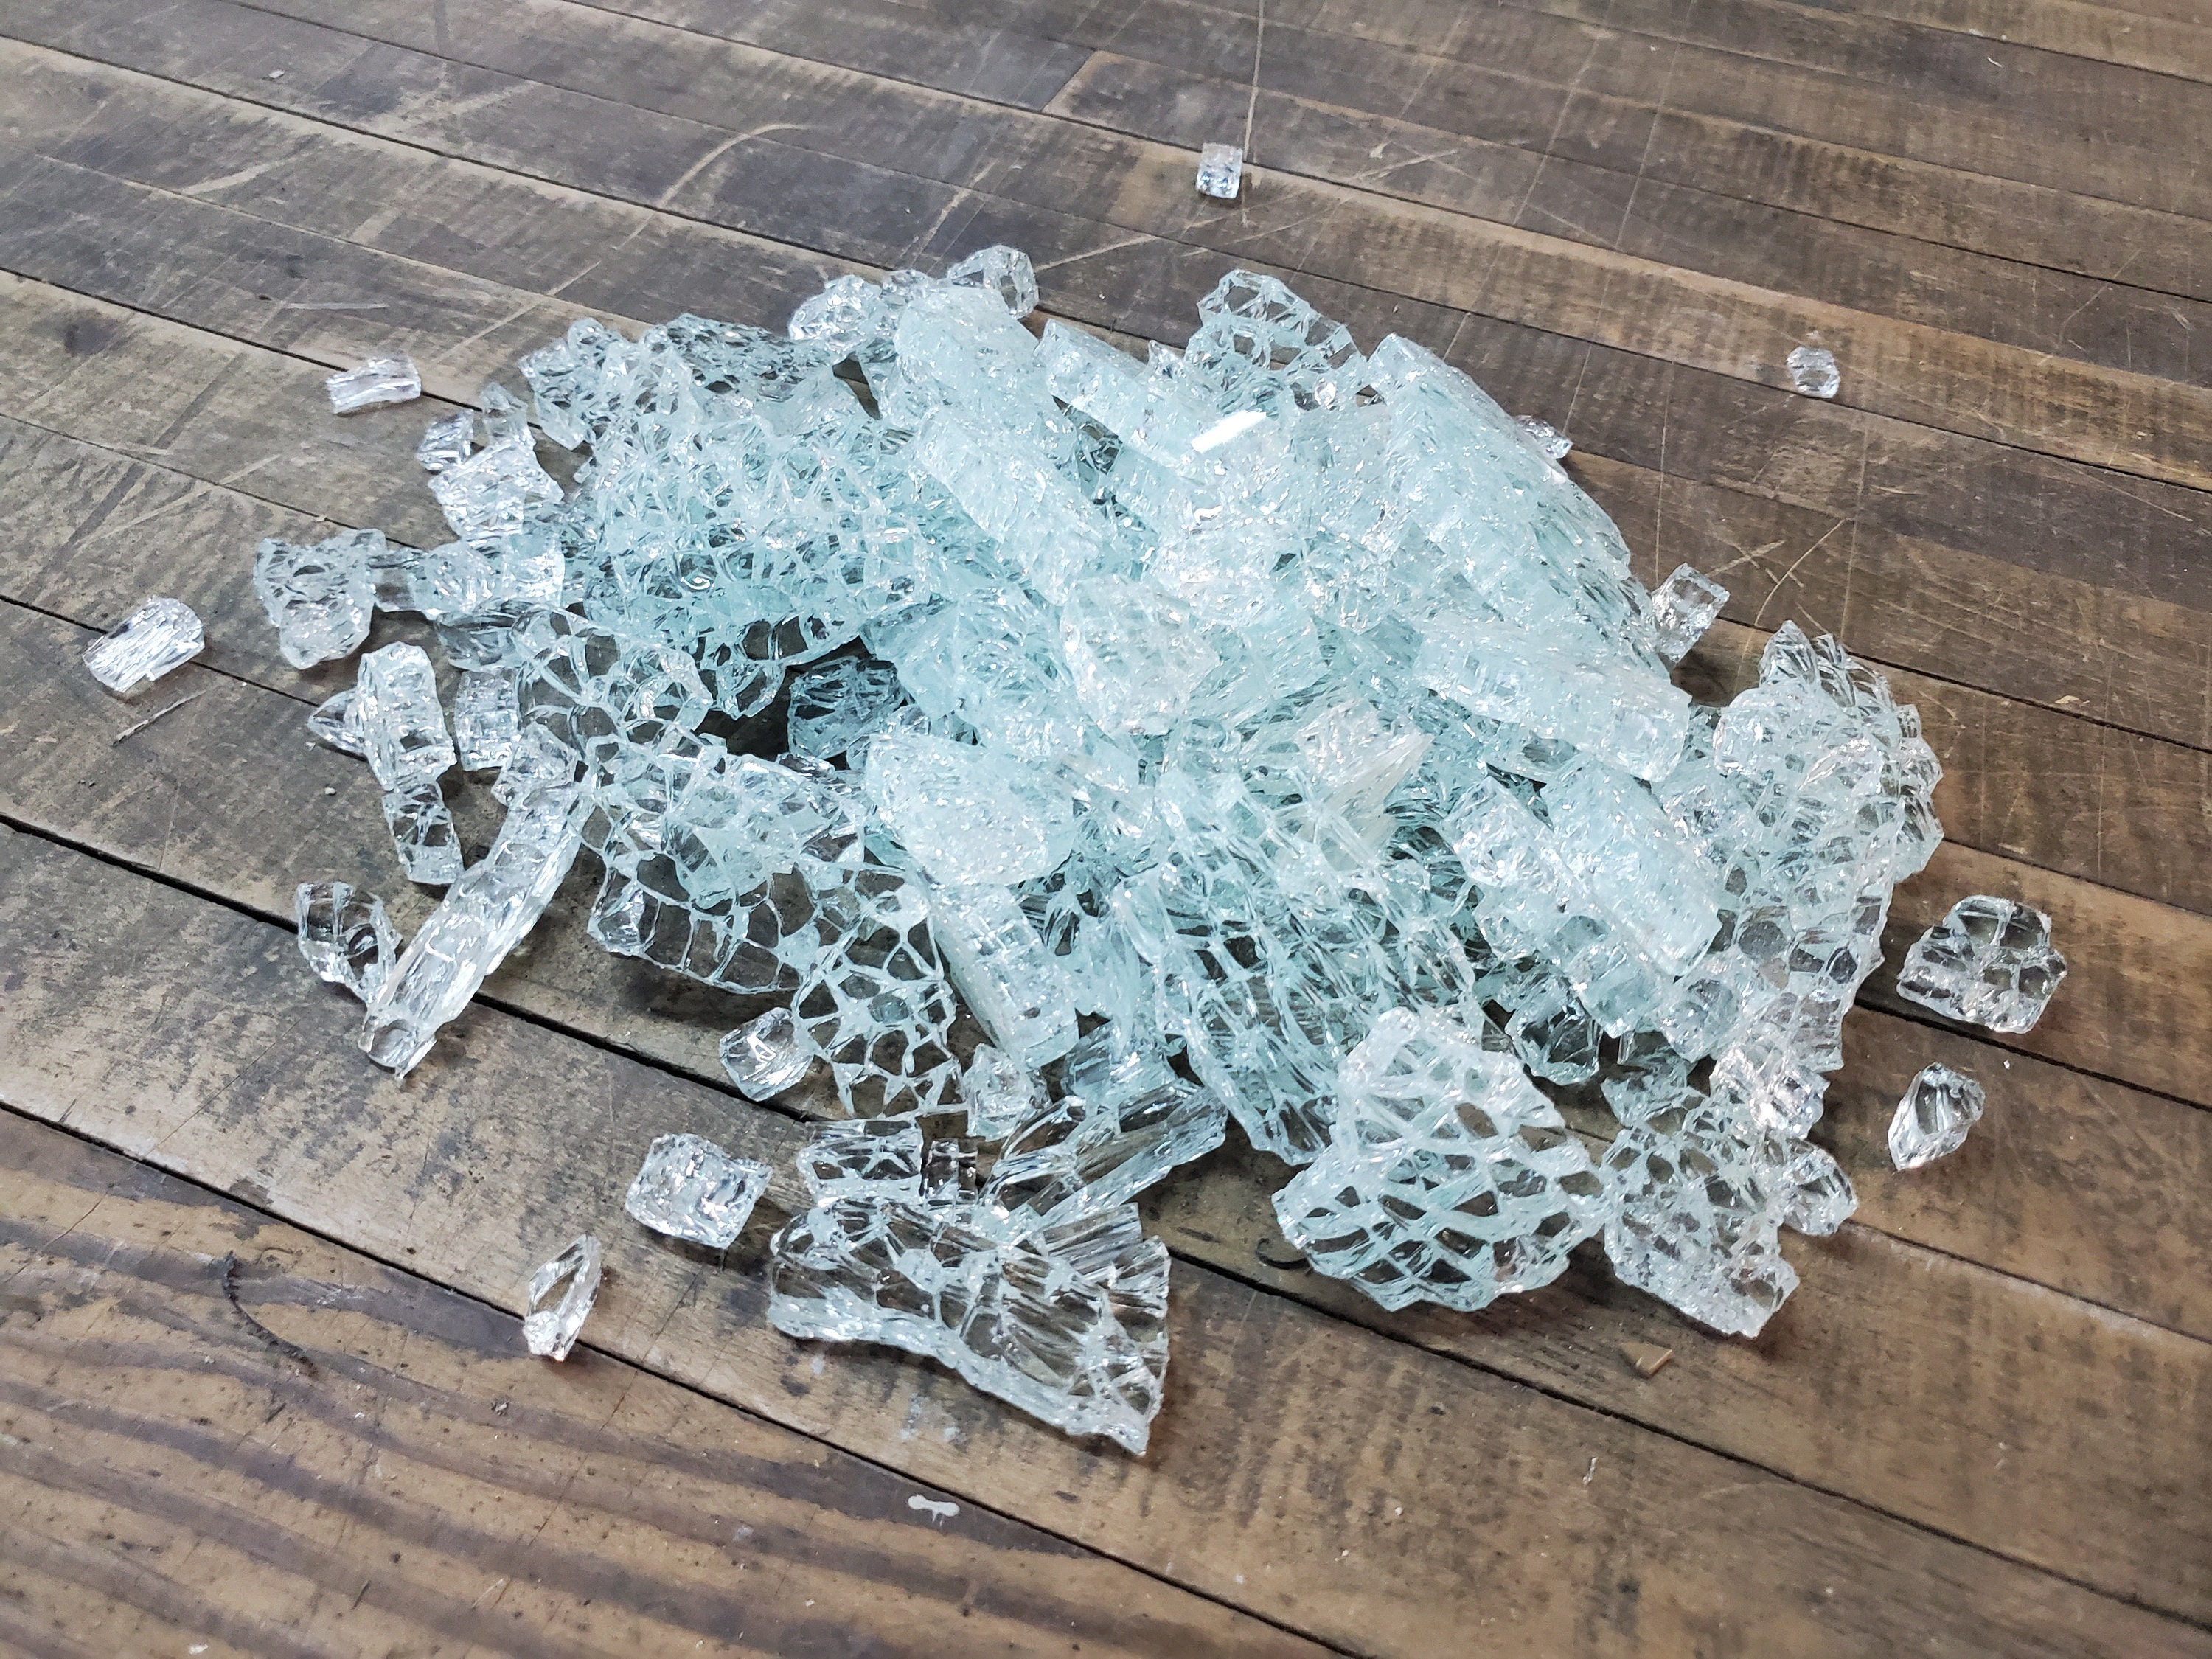 Shattered Glass Photos for Sale - Fine Art America